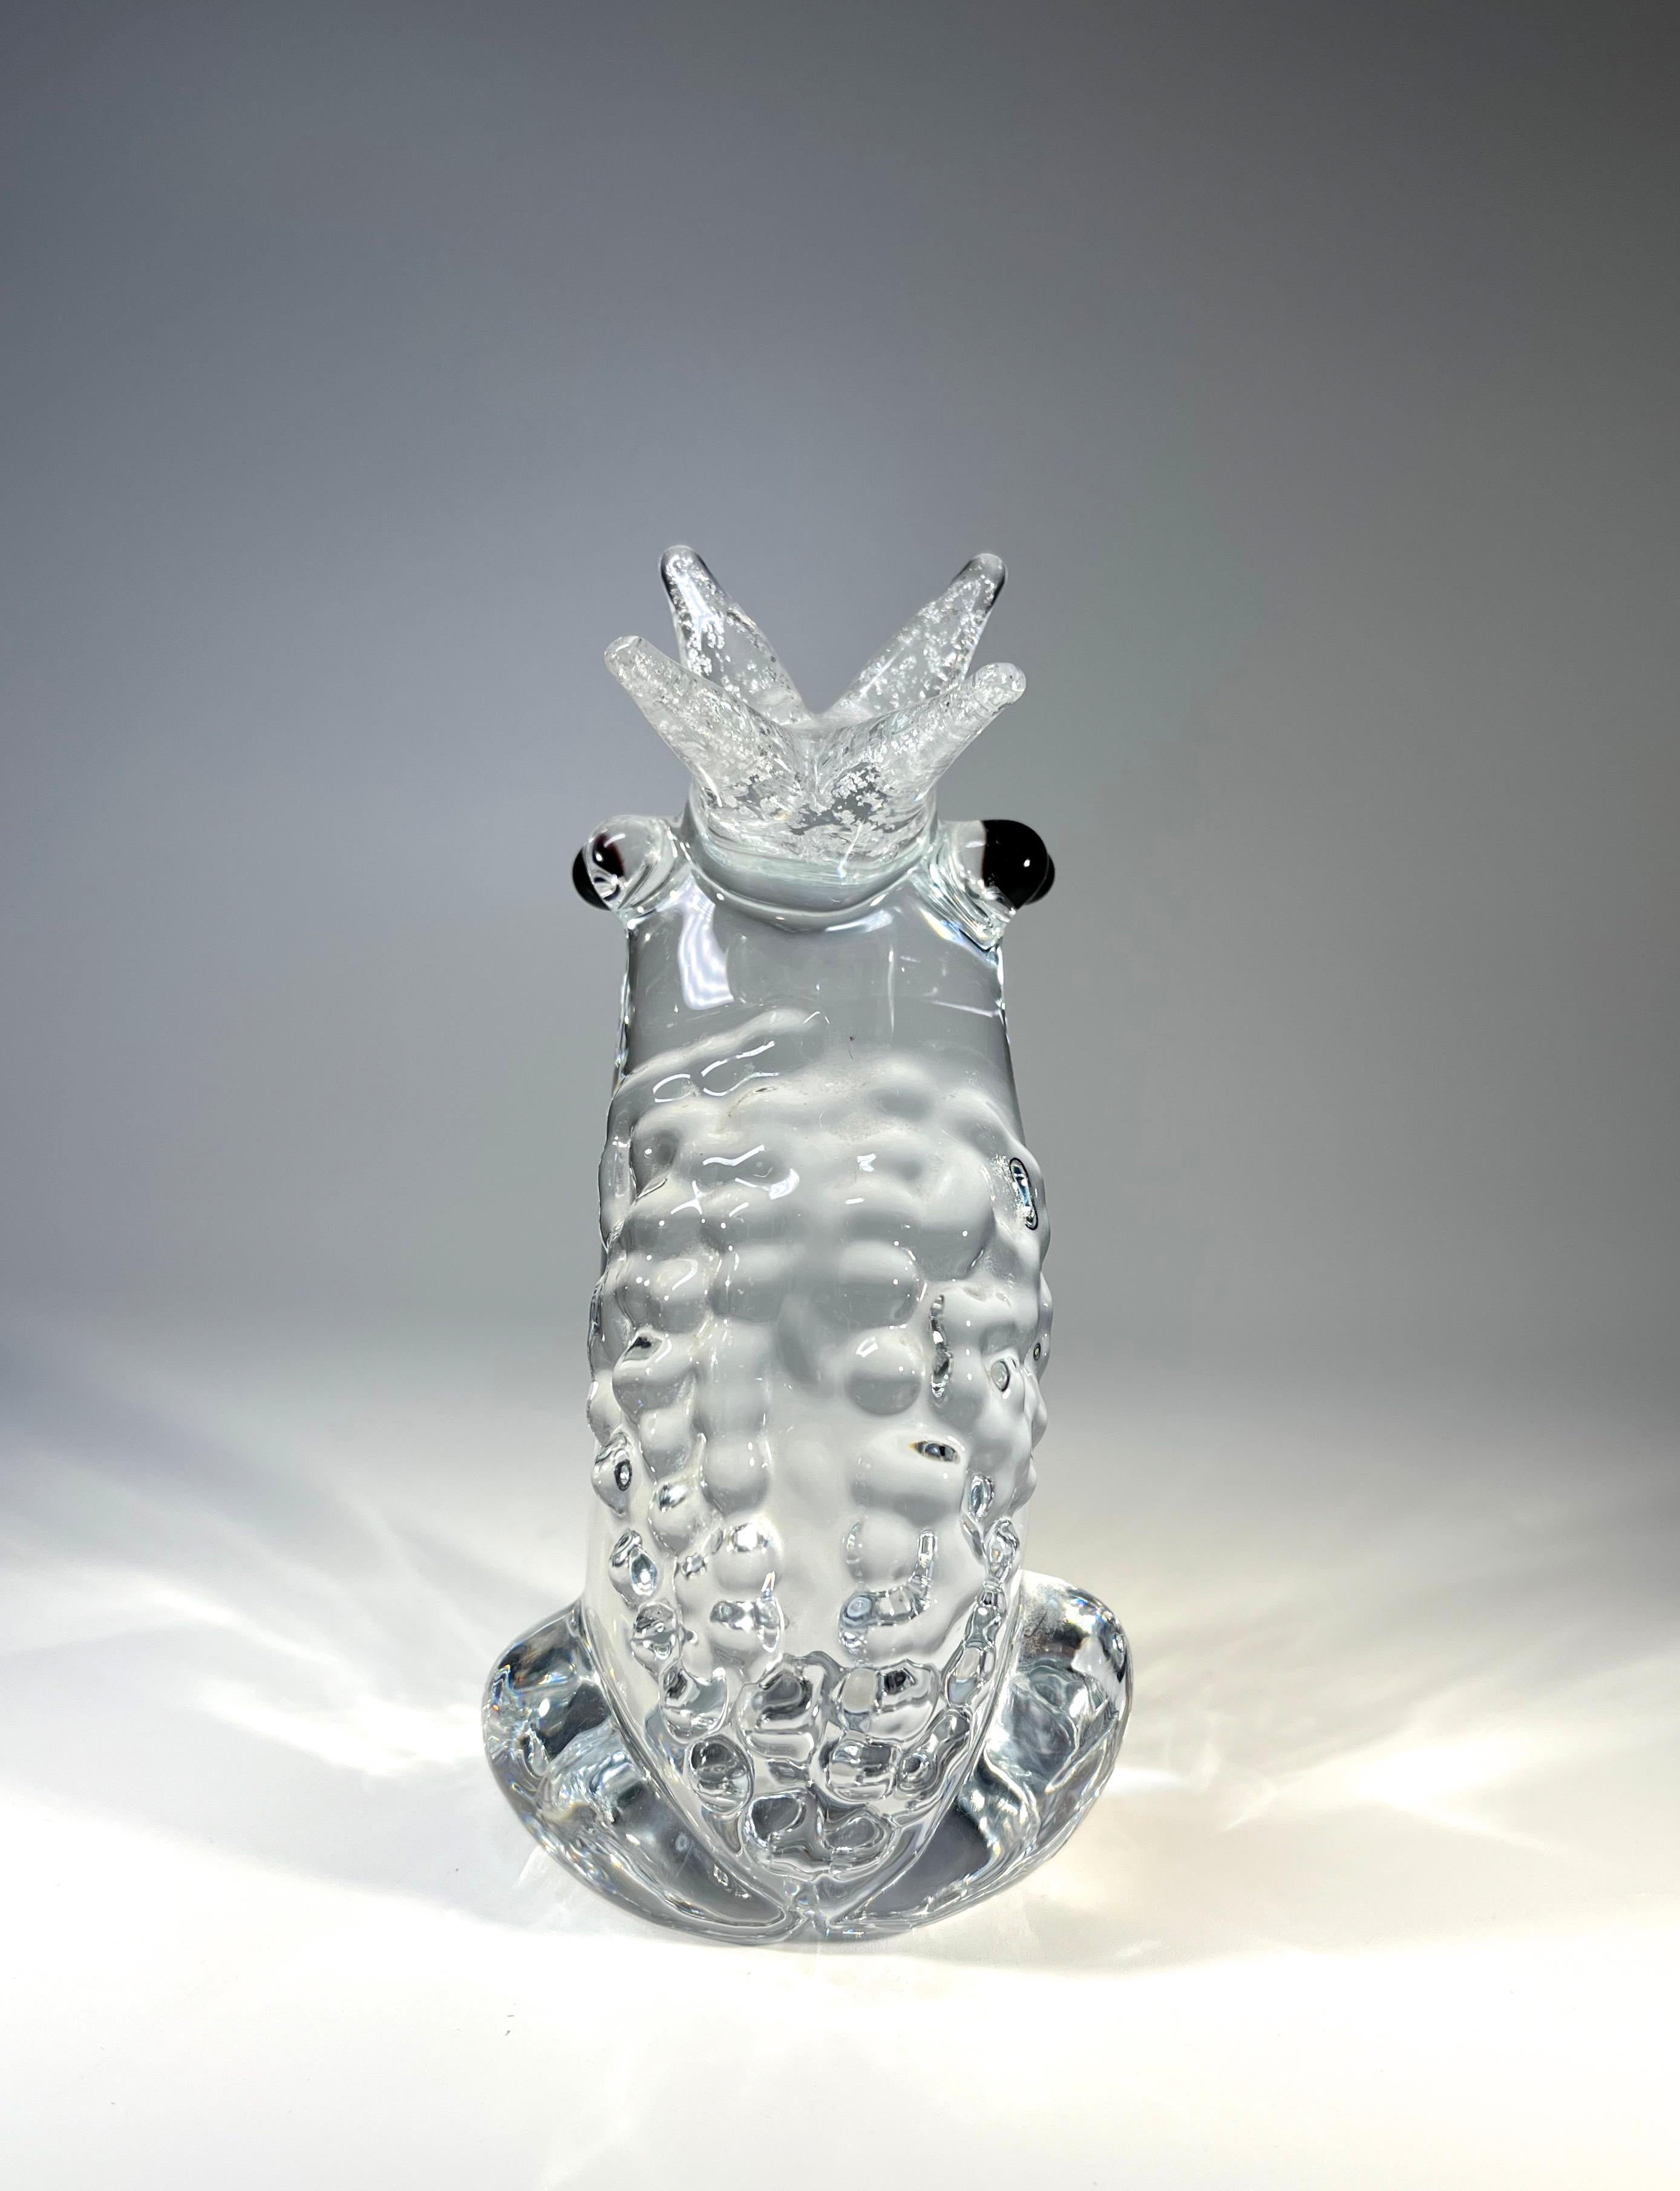 Swedish Handsome Frog Prince Crystal Paperweight By Marcolin Art Crystal Sweden c1988-91 For Sale